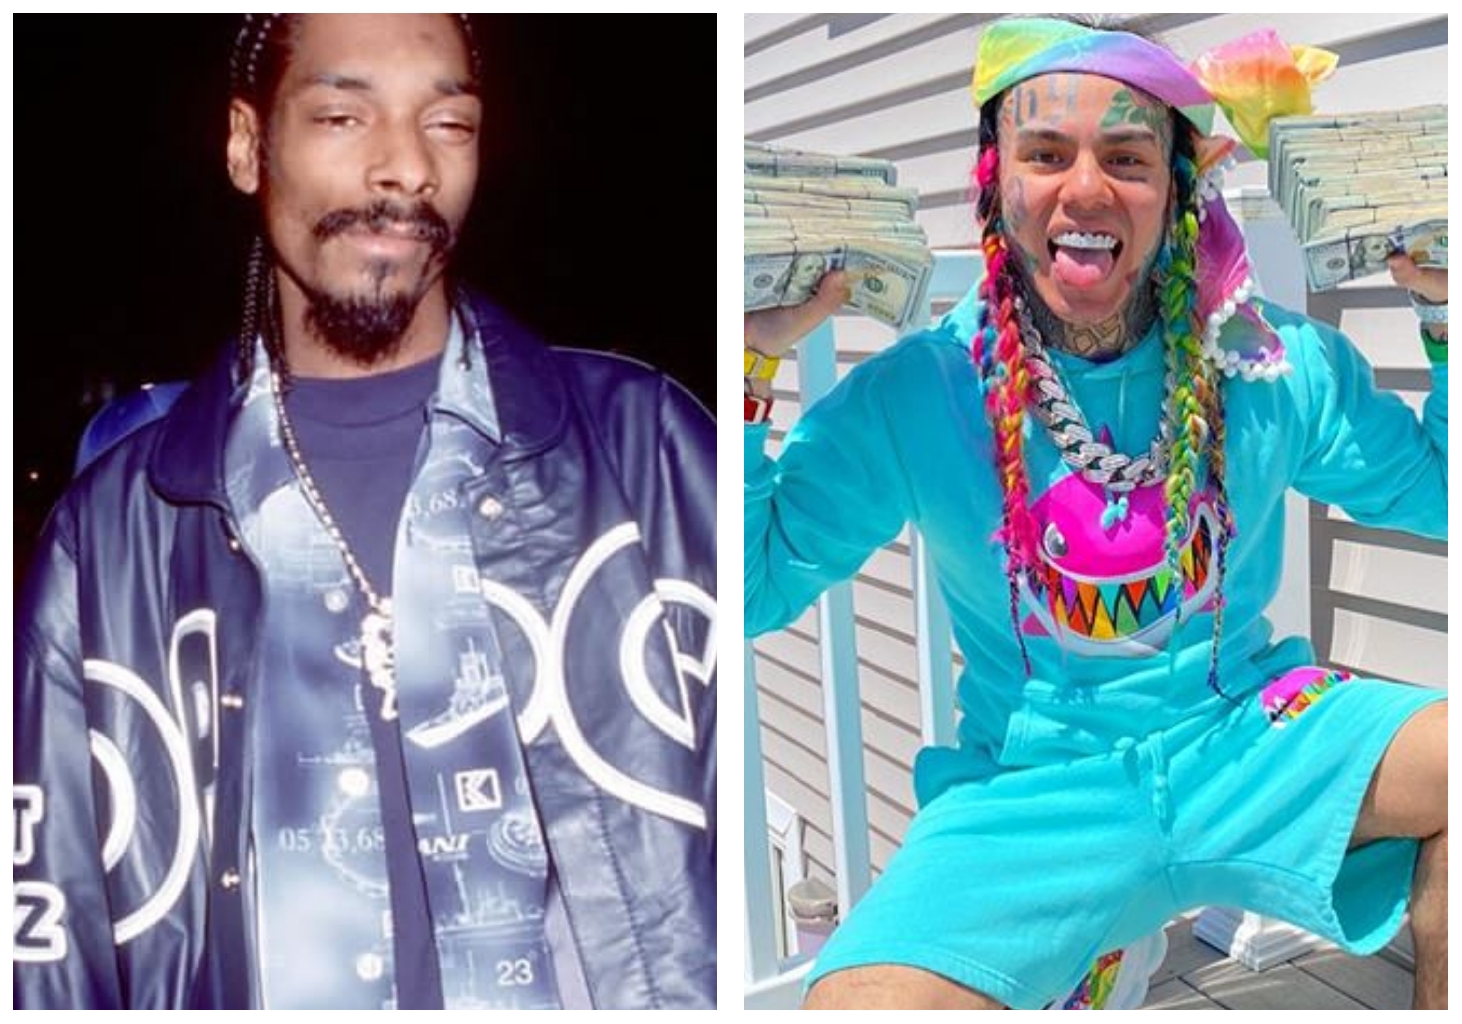 "I ain't the one" – Snoop Dogg blast 6ix9ine over alleging that he's a snitch